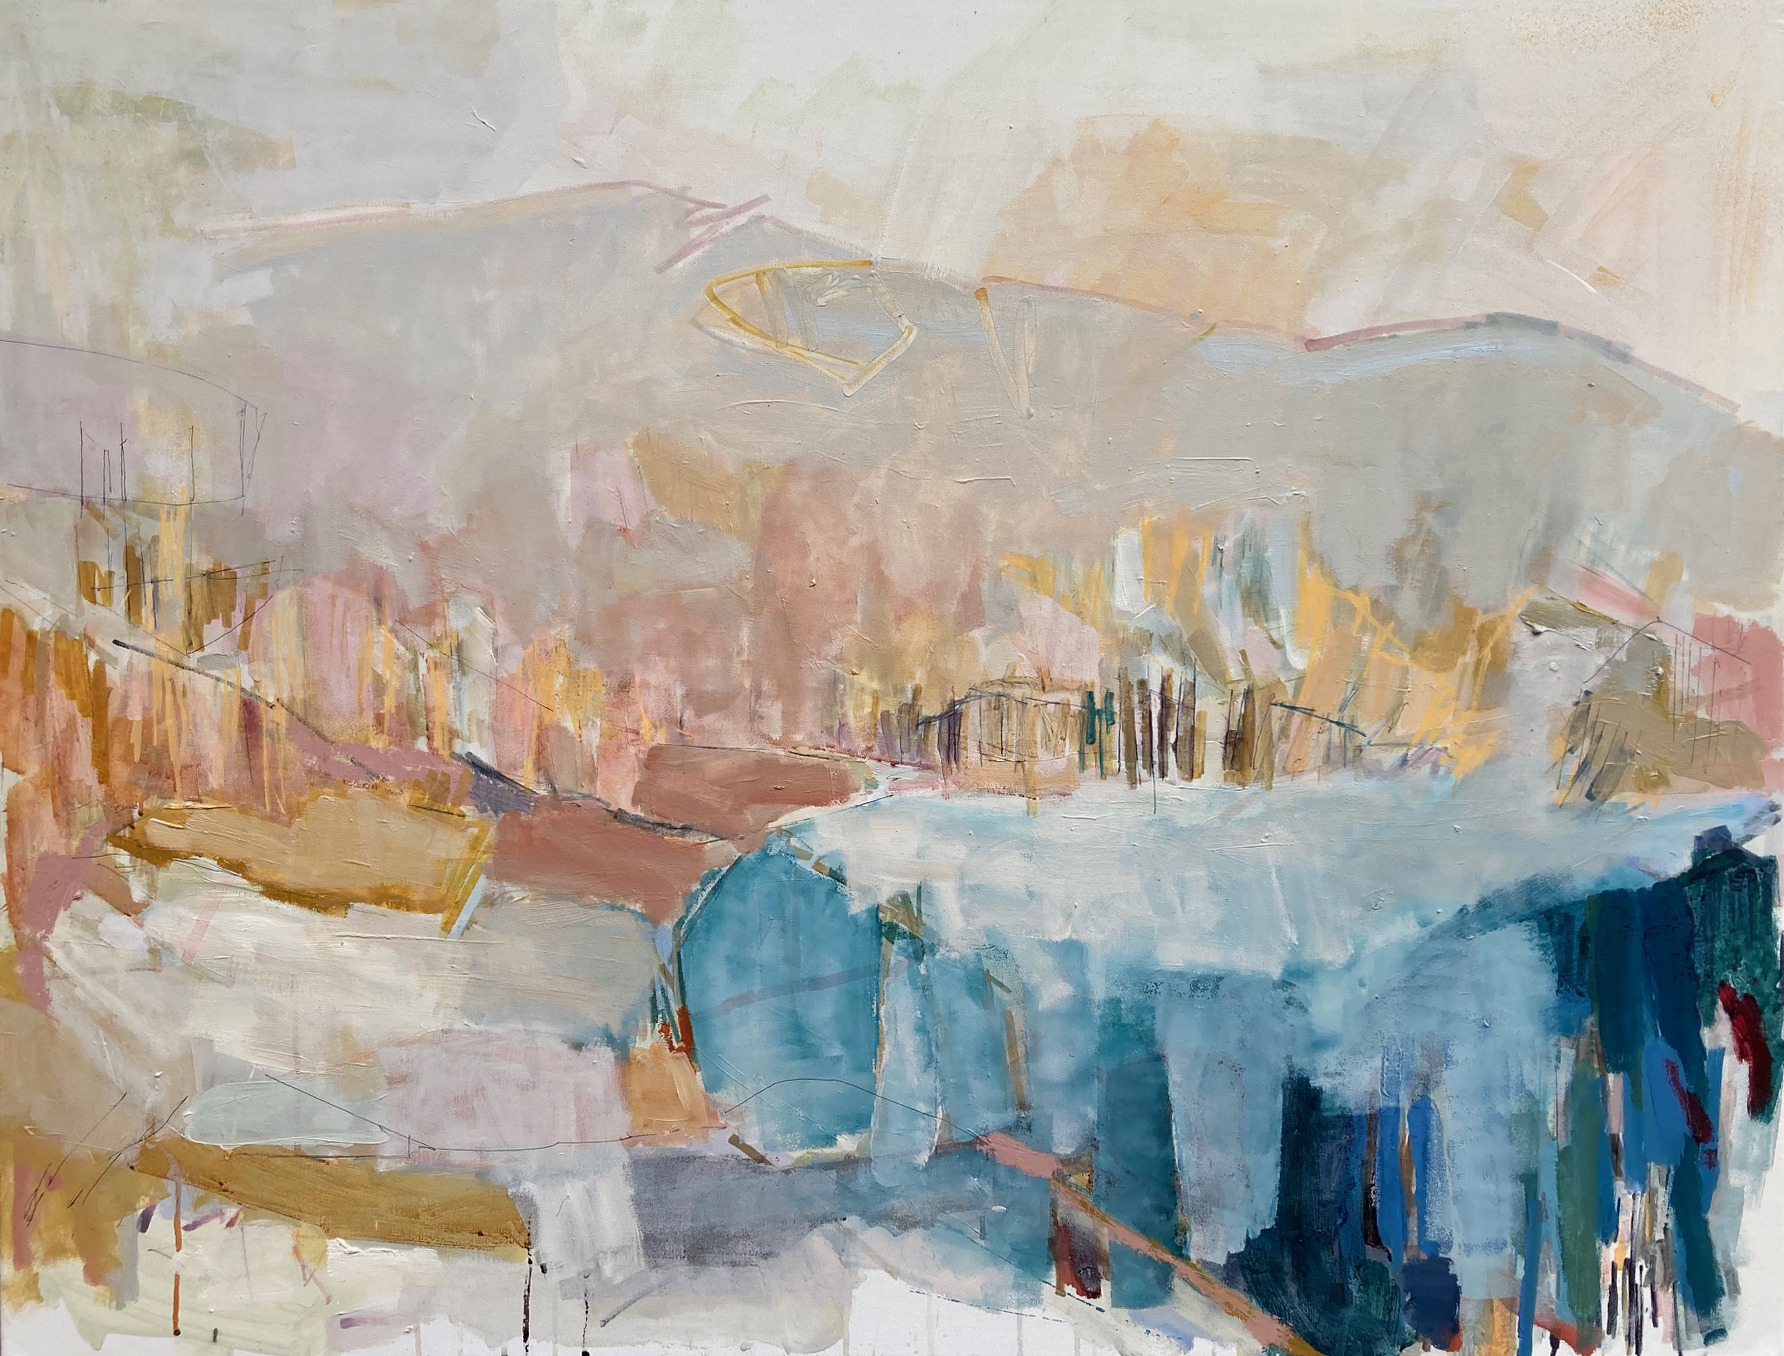 Colin Taylor - Grasmere from Loughrigg Terrace #1 - oil, acrylic, ink and pen on linen 91.5x122cm £3900